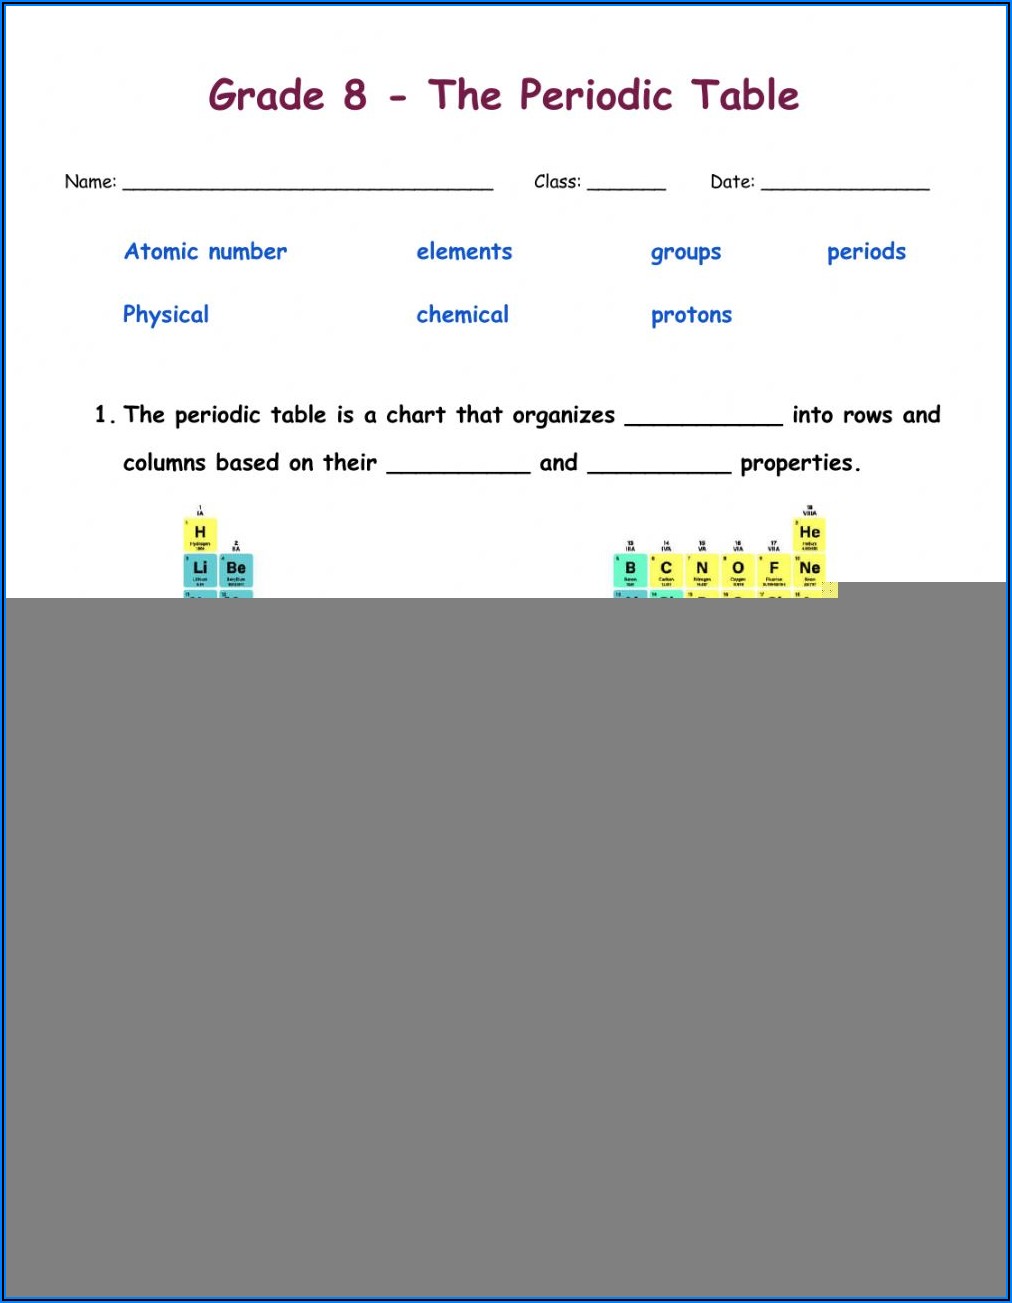 Periodic Table Of Elements Worksheet With Answers Pdf